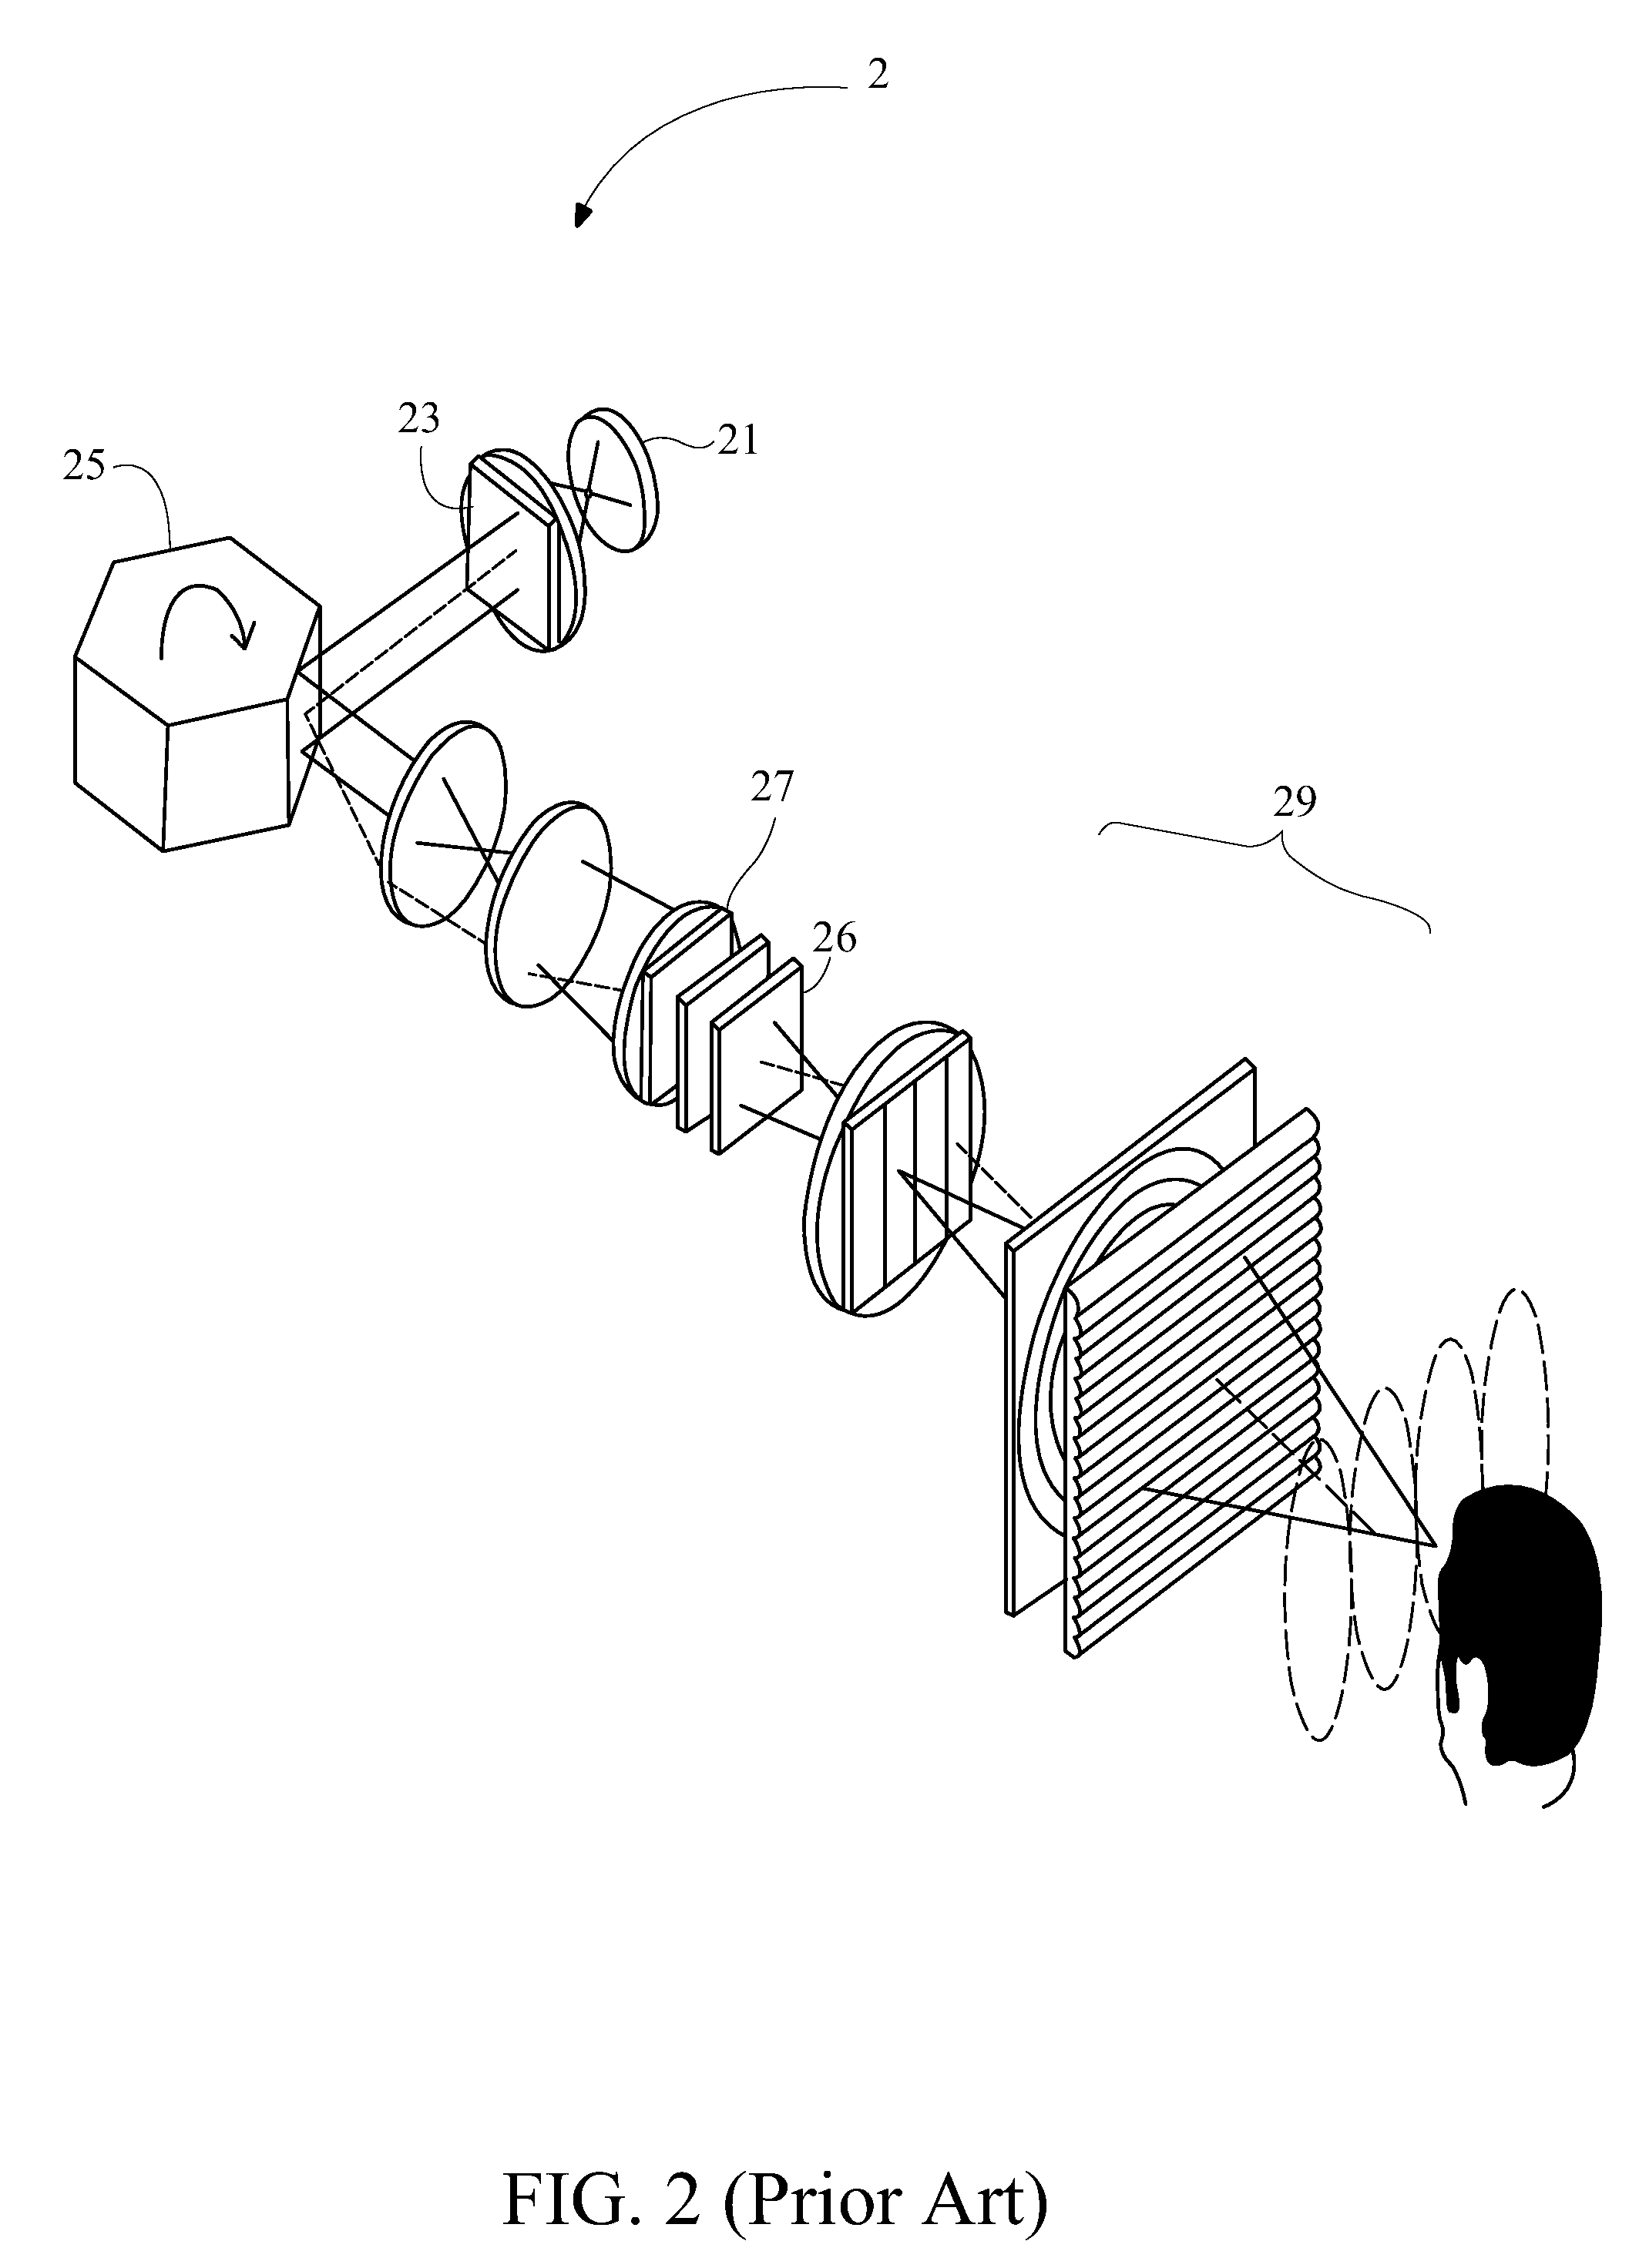 Display apparatus for displaying multiple view angle images